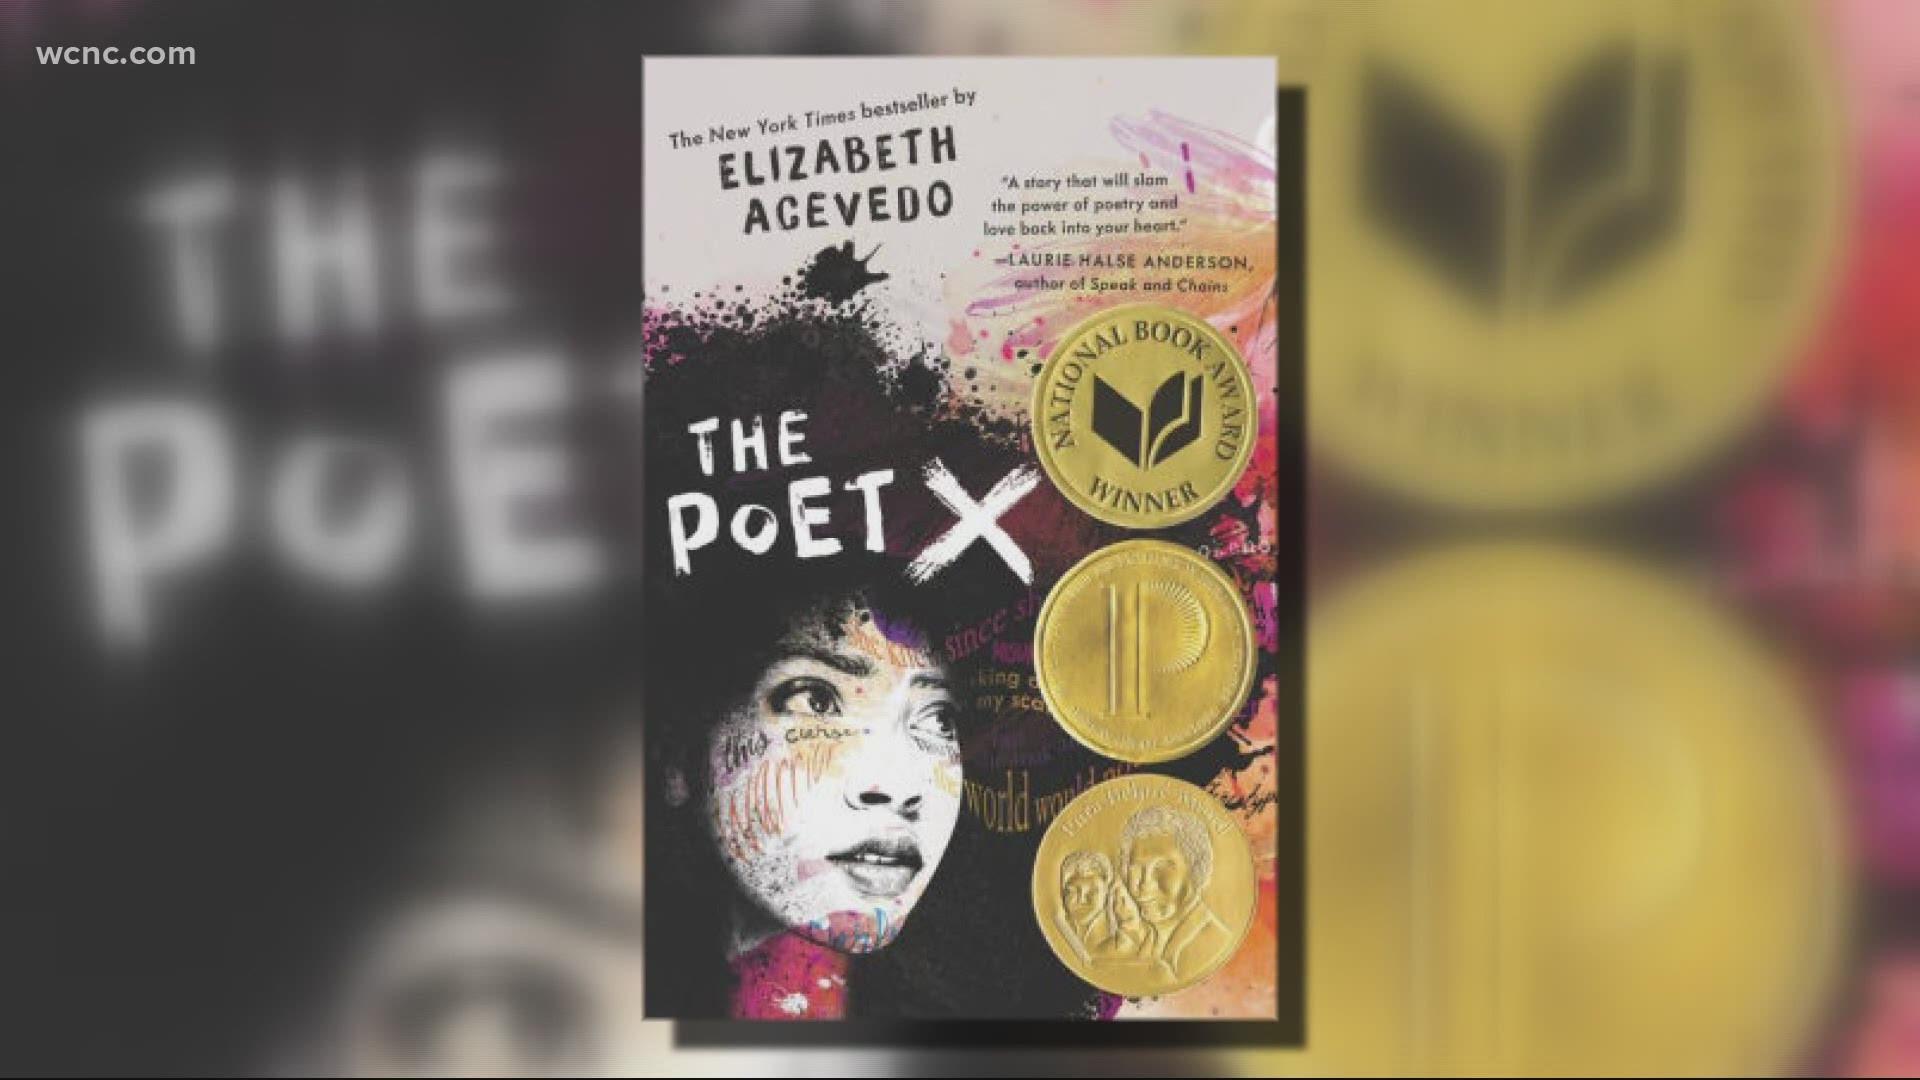 The Poet X has been required reading for Freshman students at Lake Norman Charter School for the past 2 years despite its mature themes